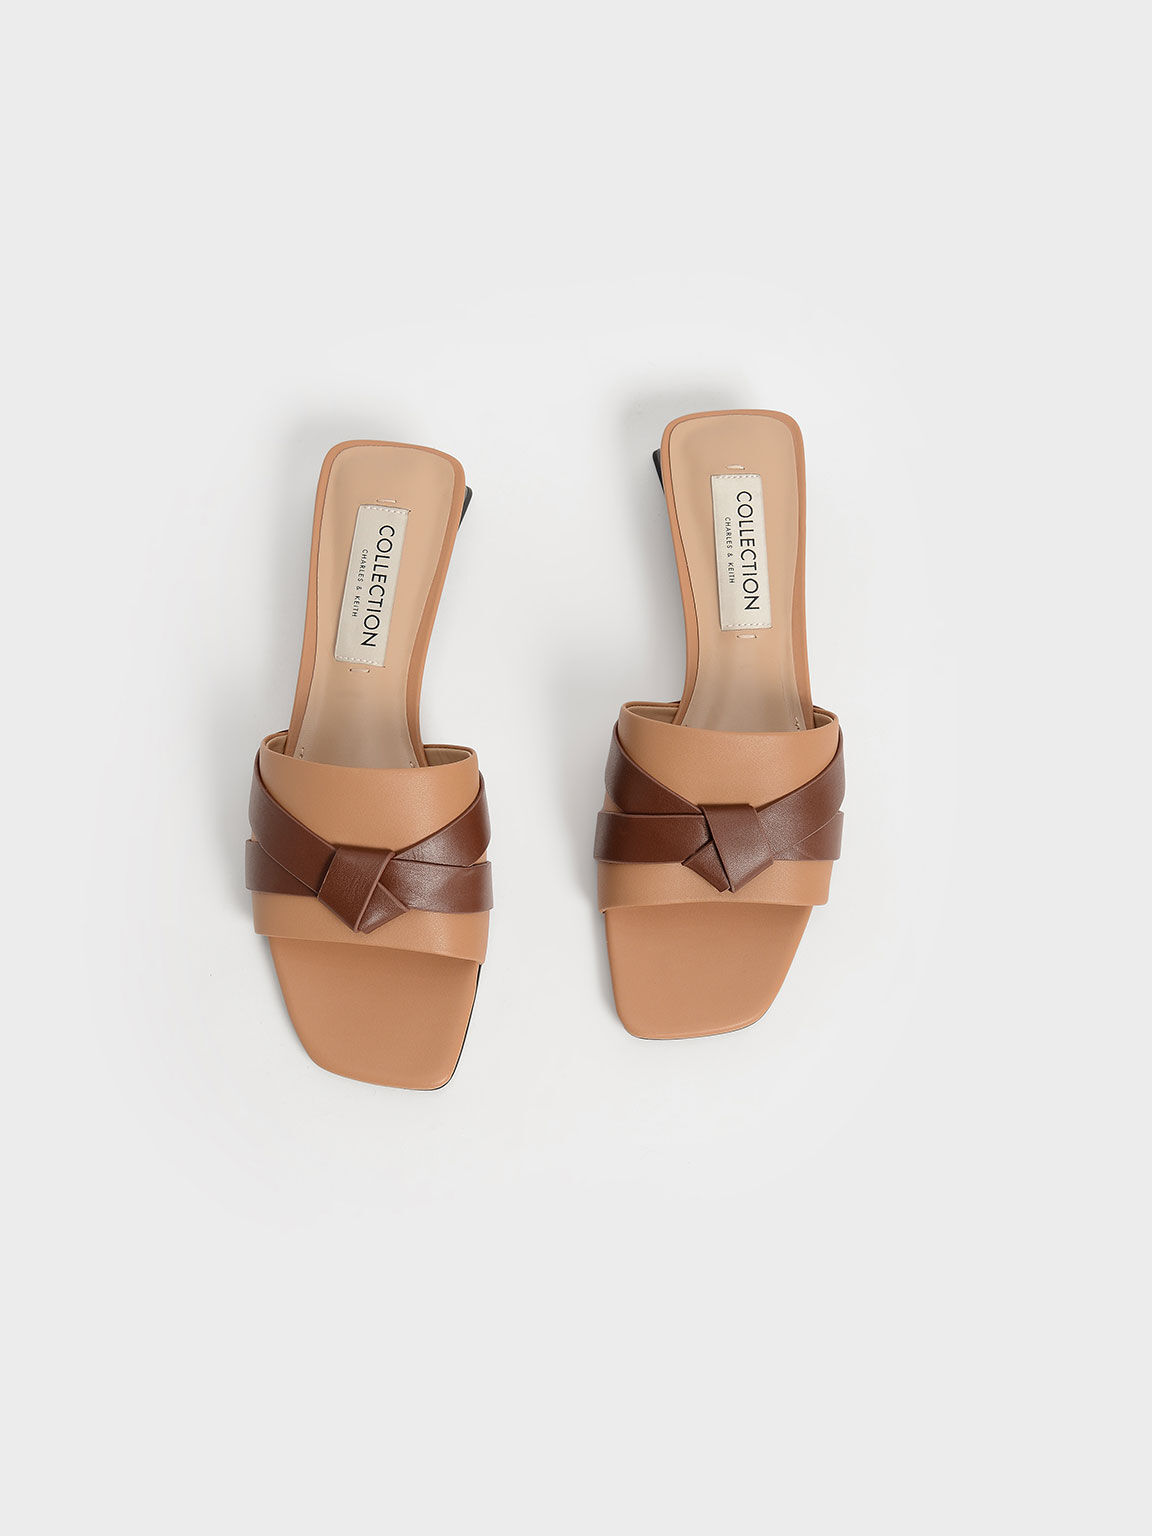 Leather Bow-Tie Trapeze Heel Mules, Caramel, hi-res